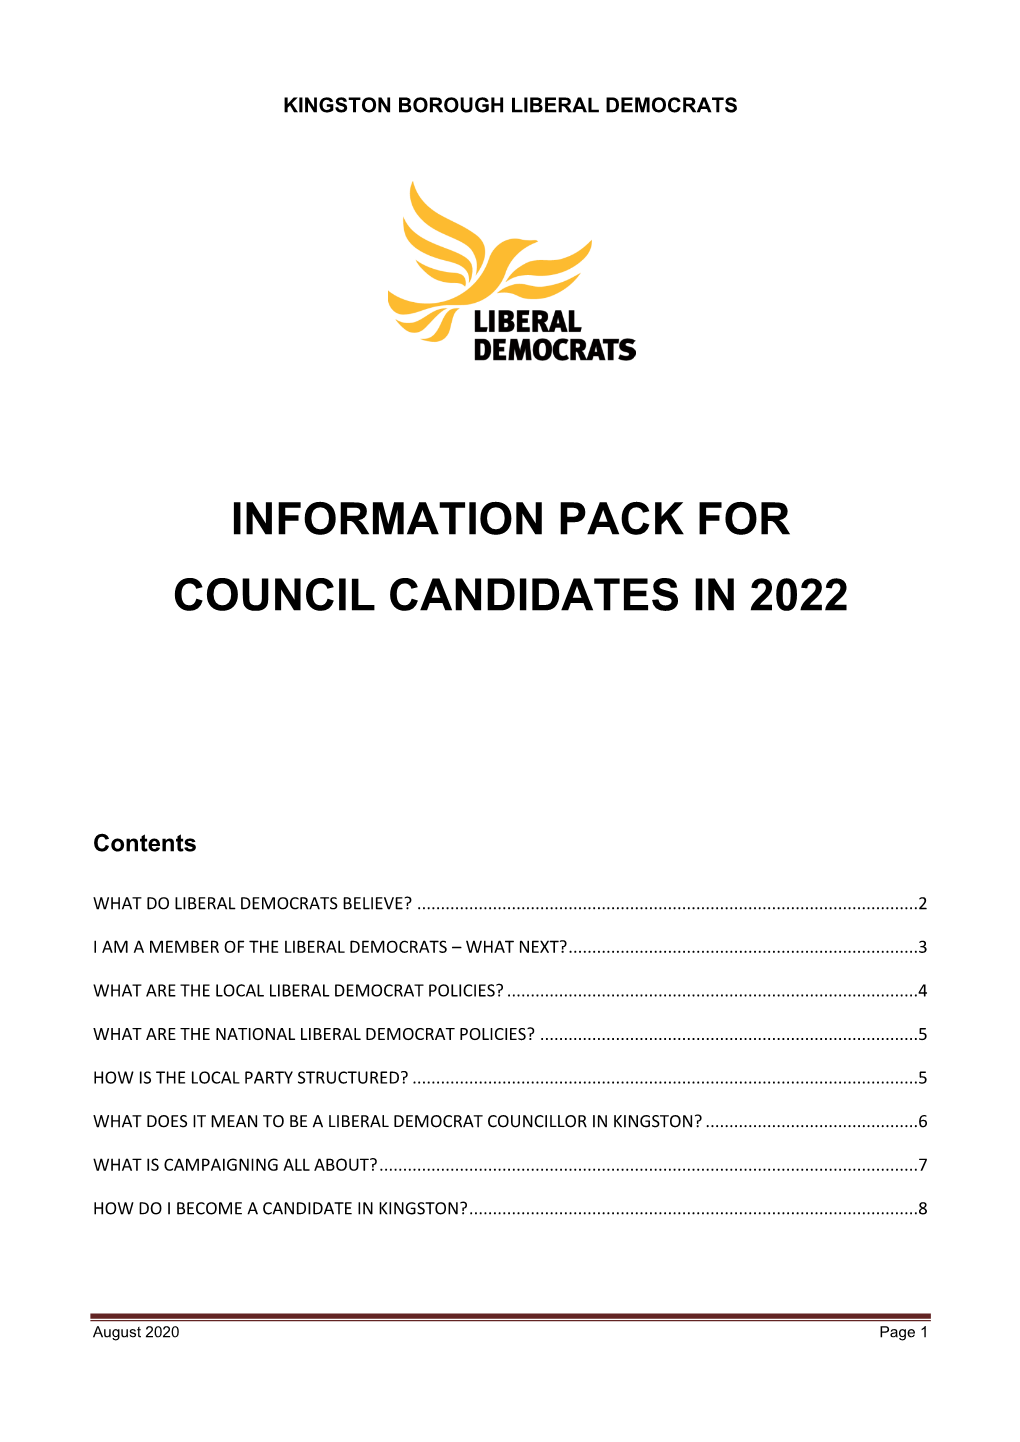 Information Pack for Council Candidates in 2022